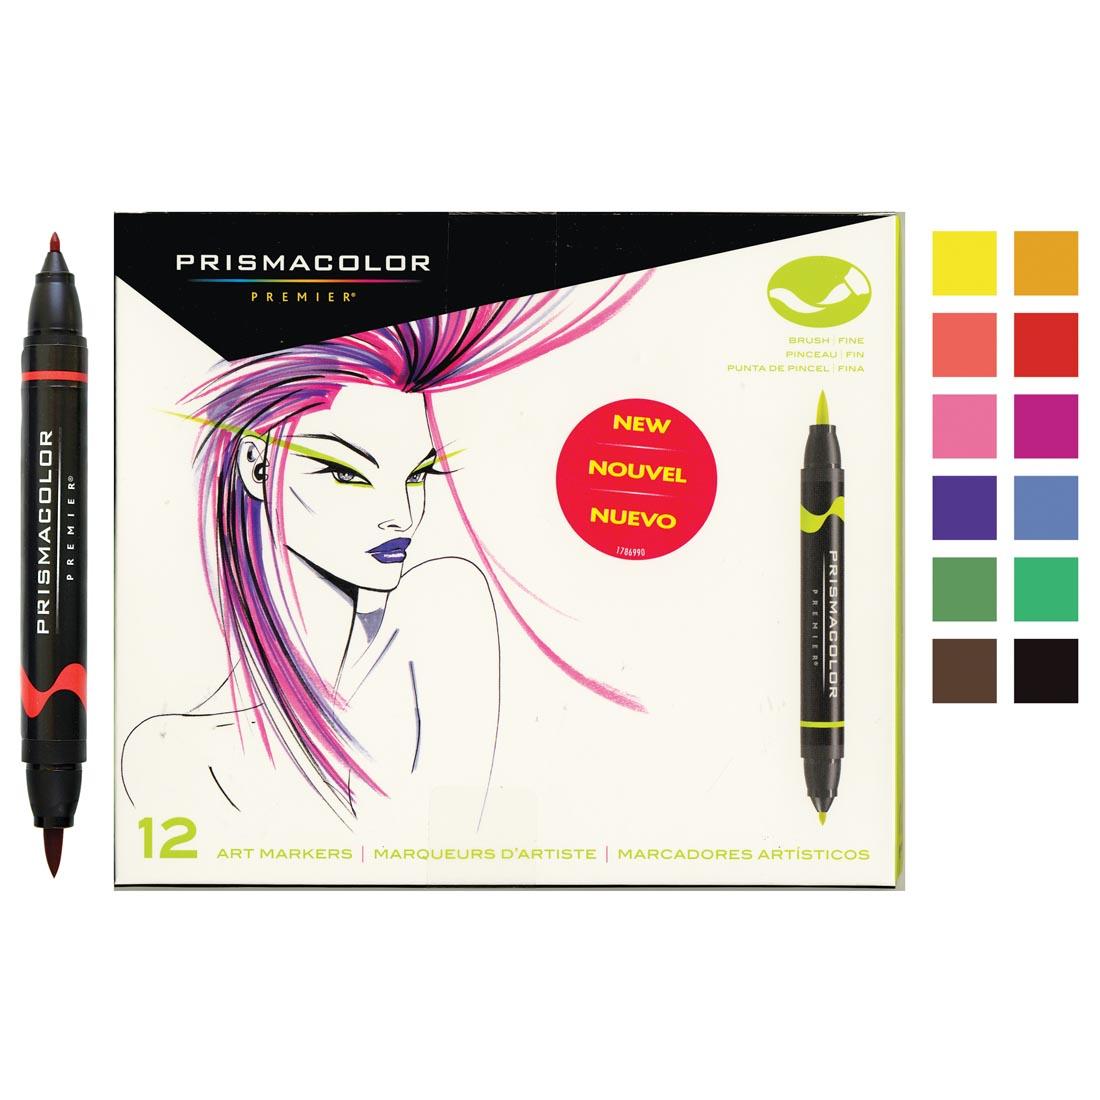 Prismacolor Premier Brush/Fine Art Markers 12-Color Set Package with a sample marker on the left and 12 color swatches on the right